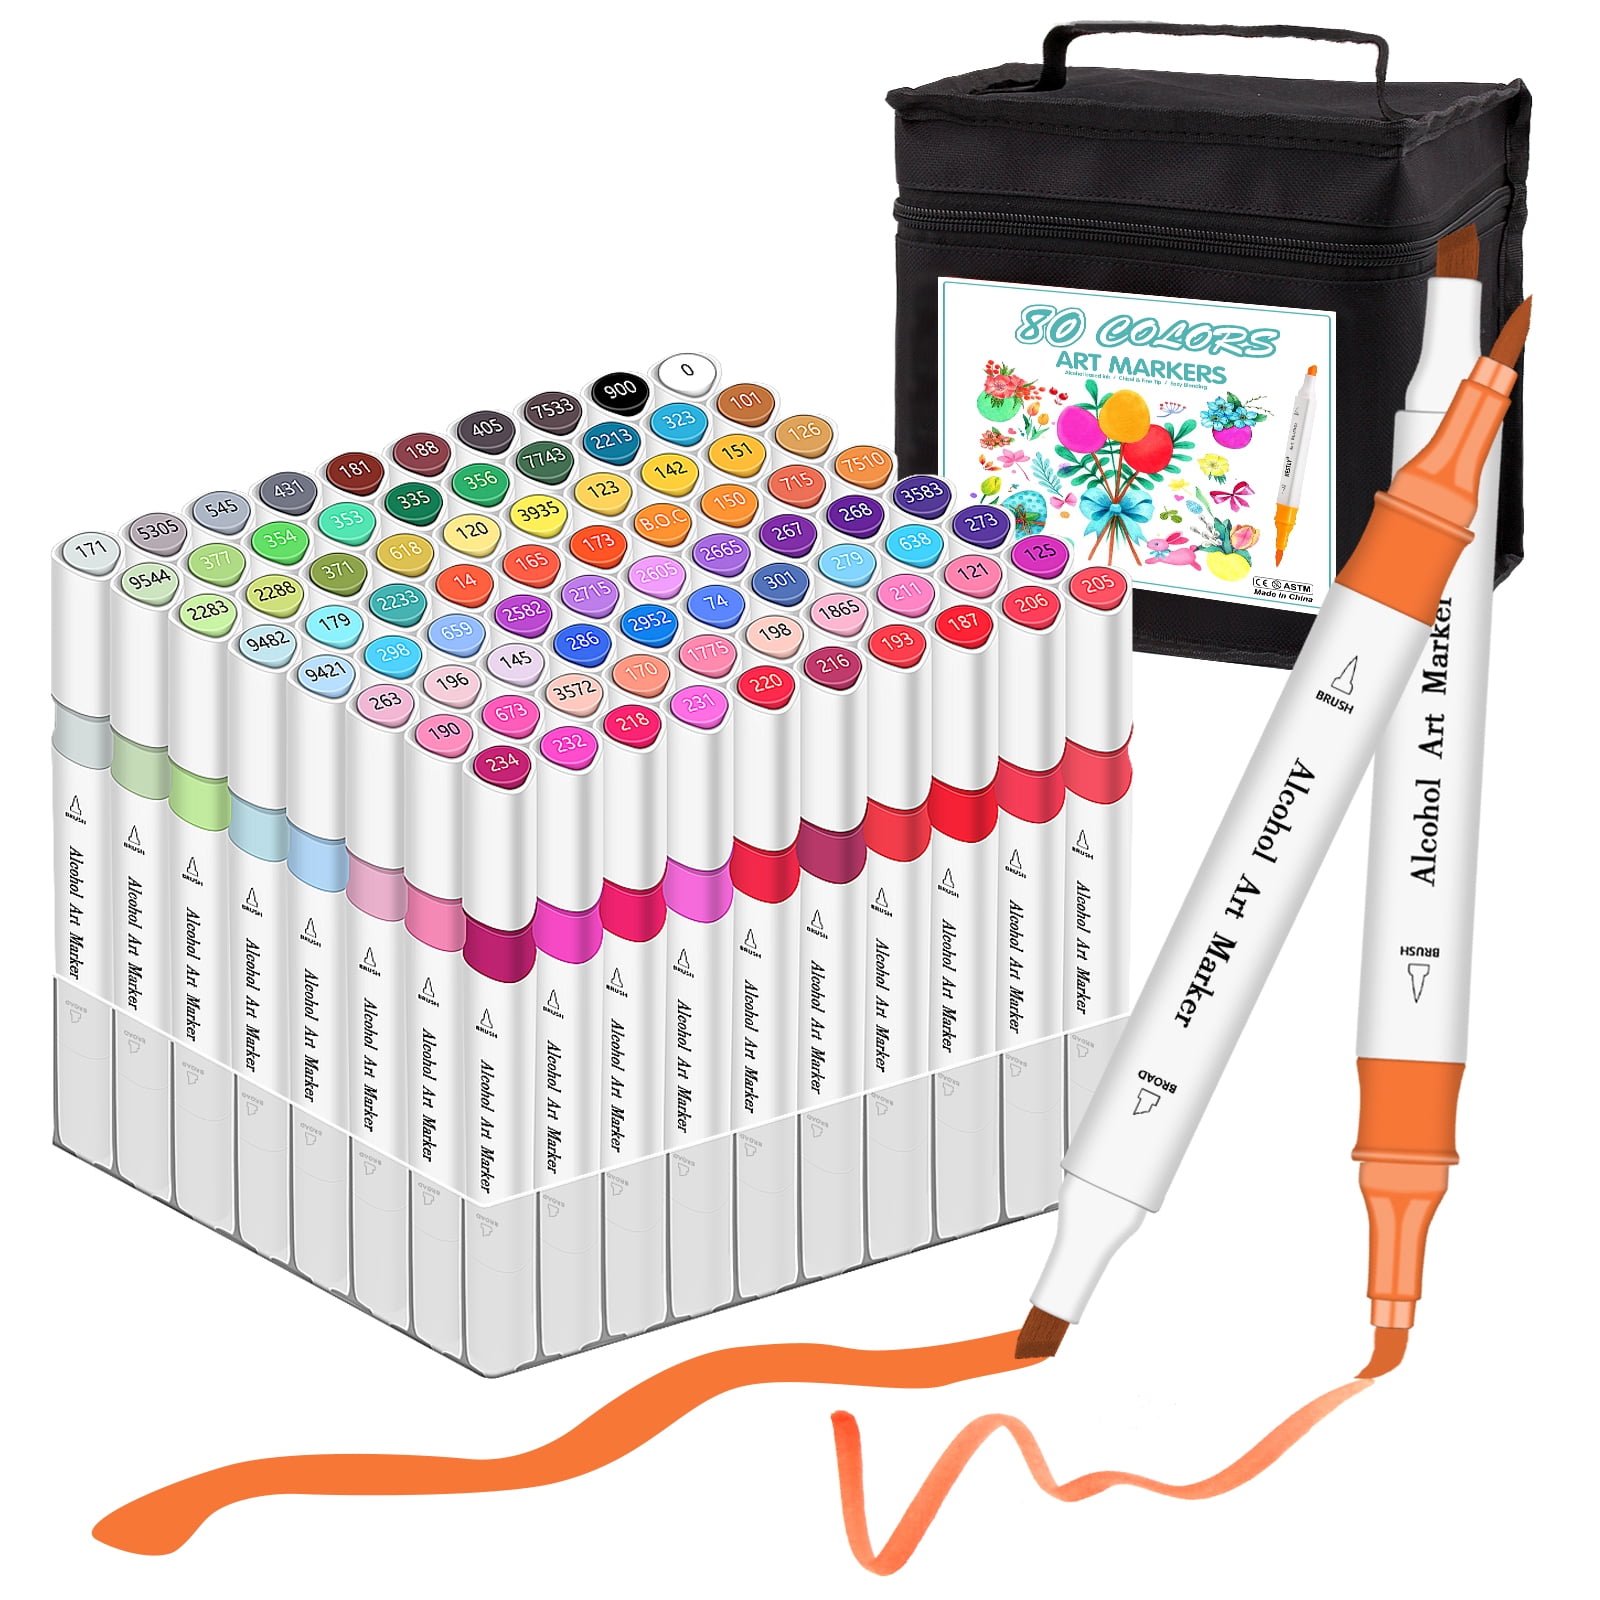 80 Colors Markers Dual Tip Permanent Art Professional Markers Pens